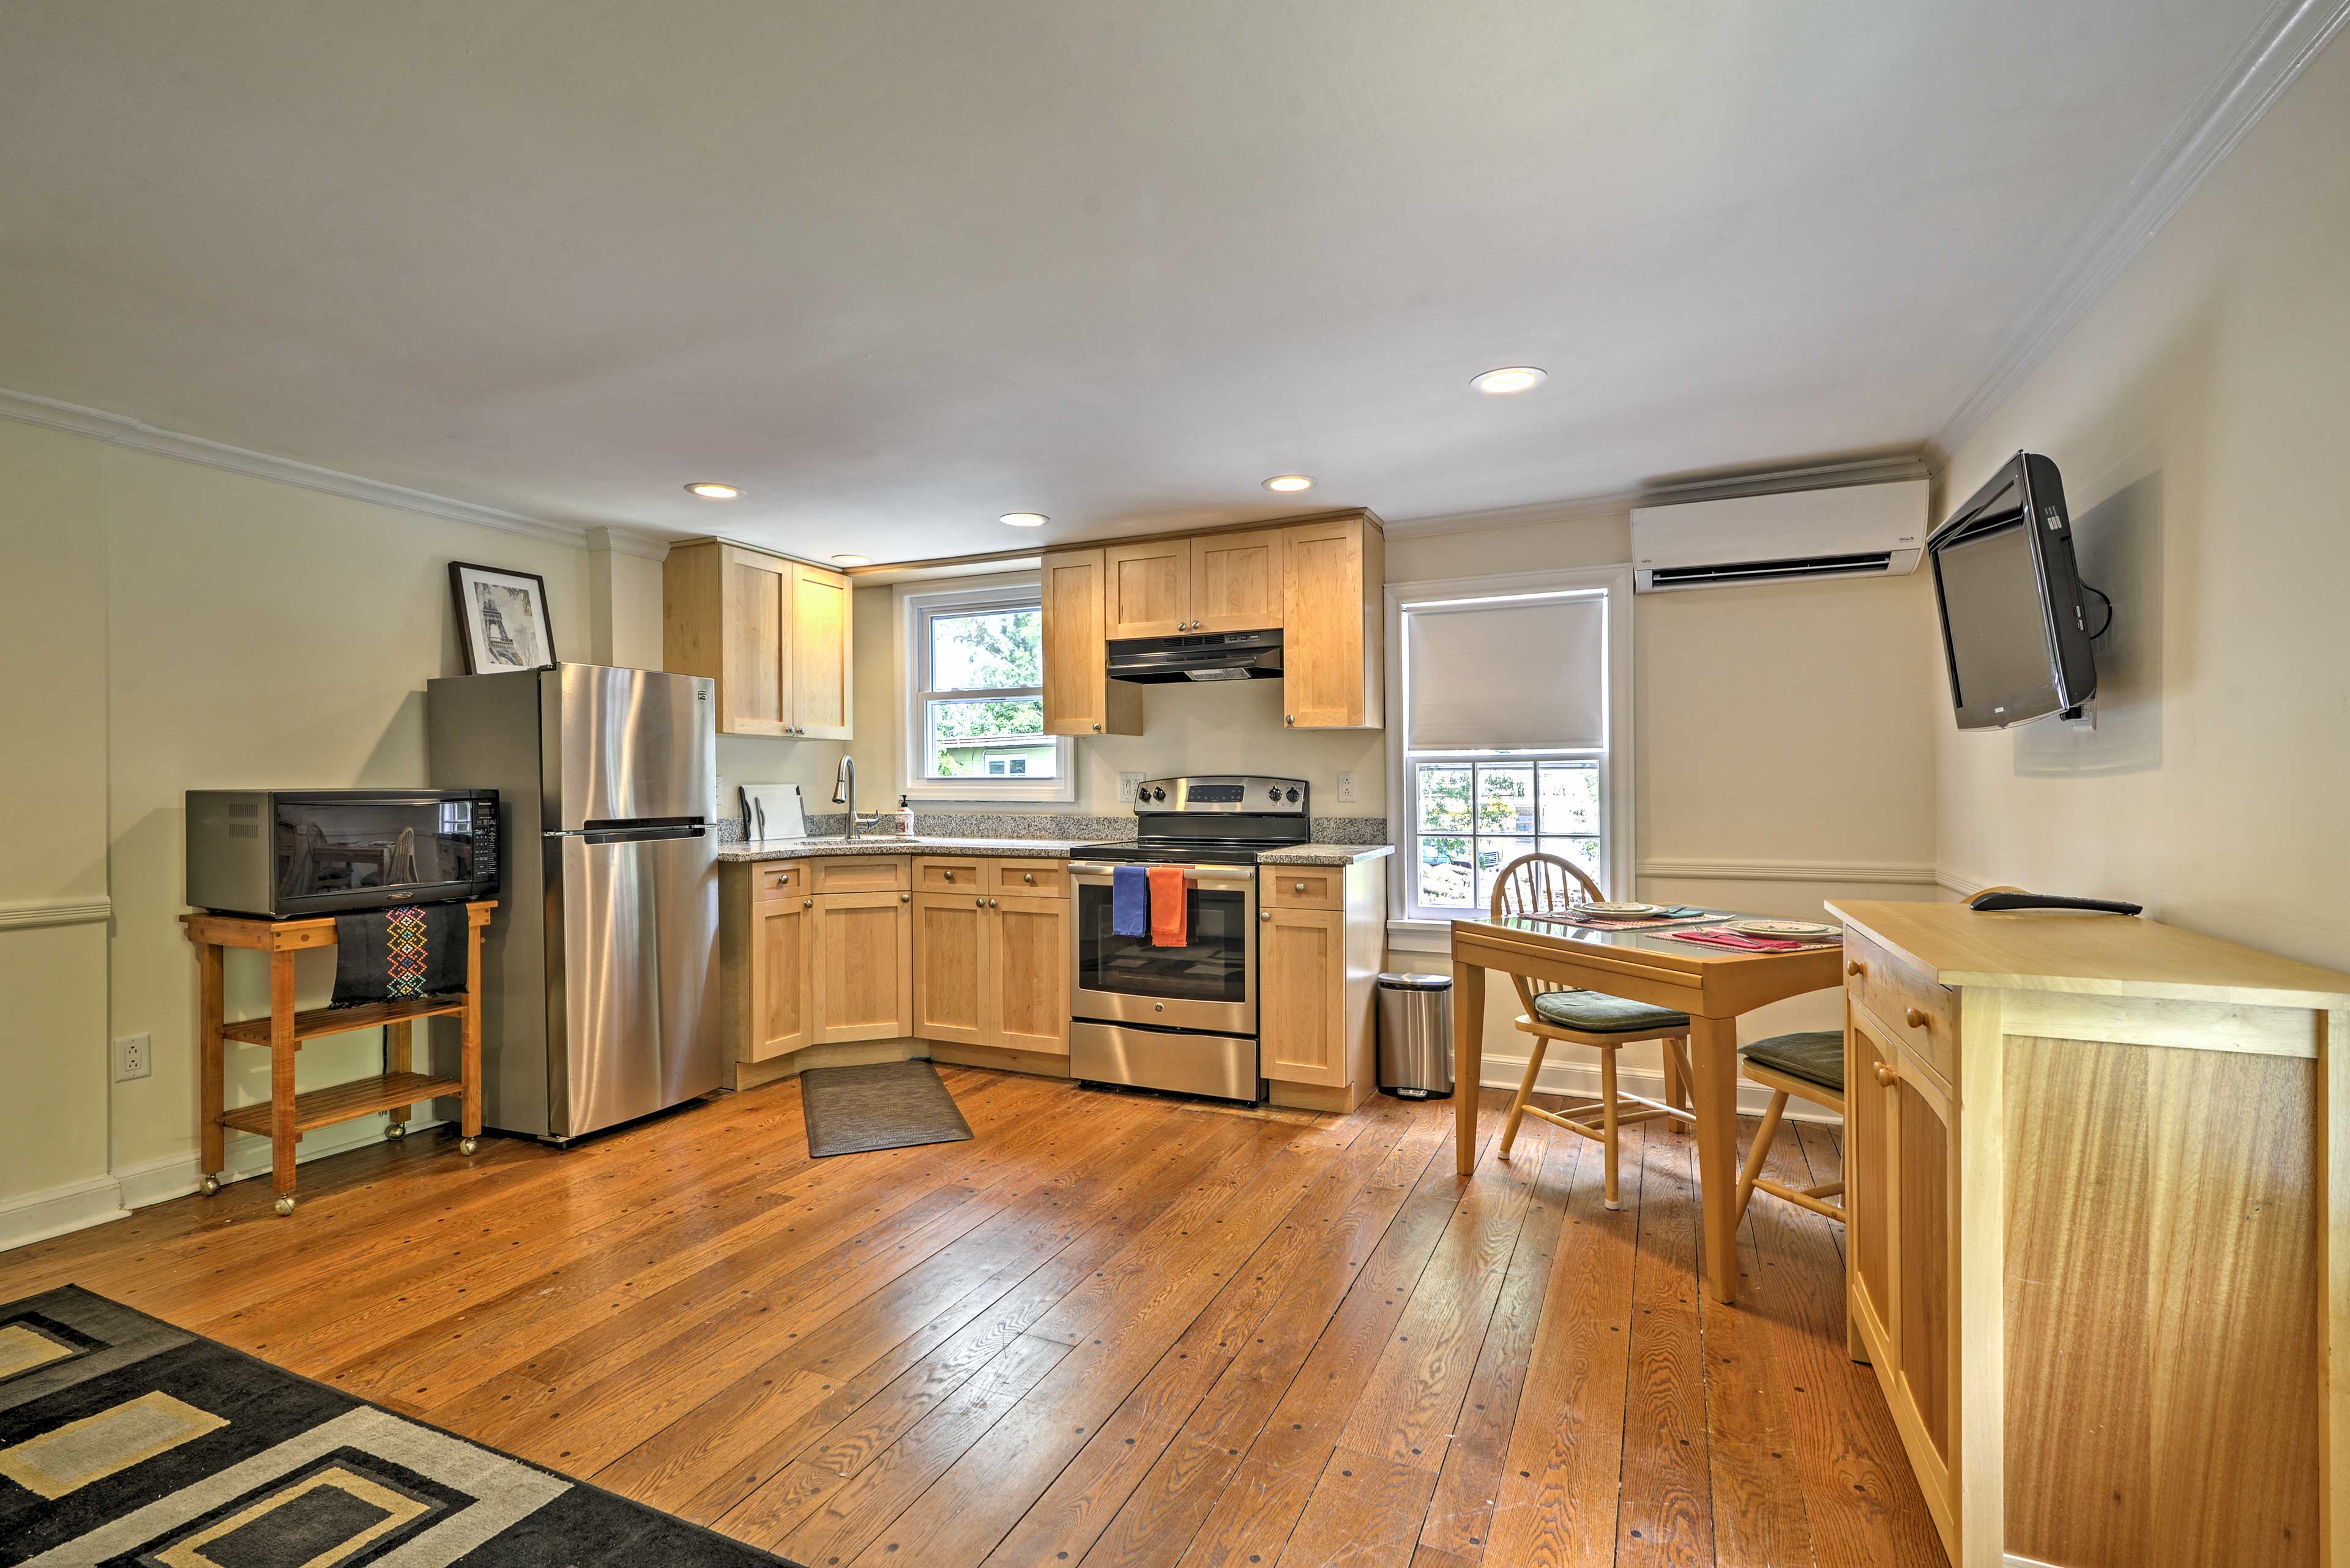 Recently remodeled, the home features all new appliances, furnishings and fixtures.